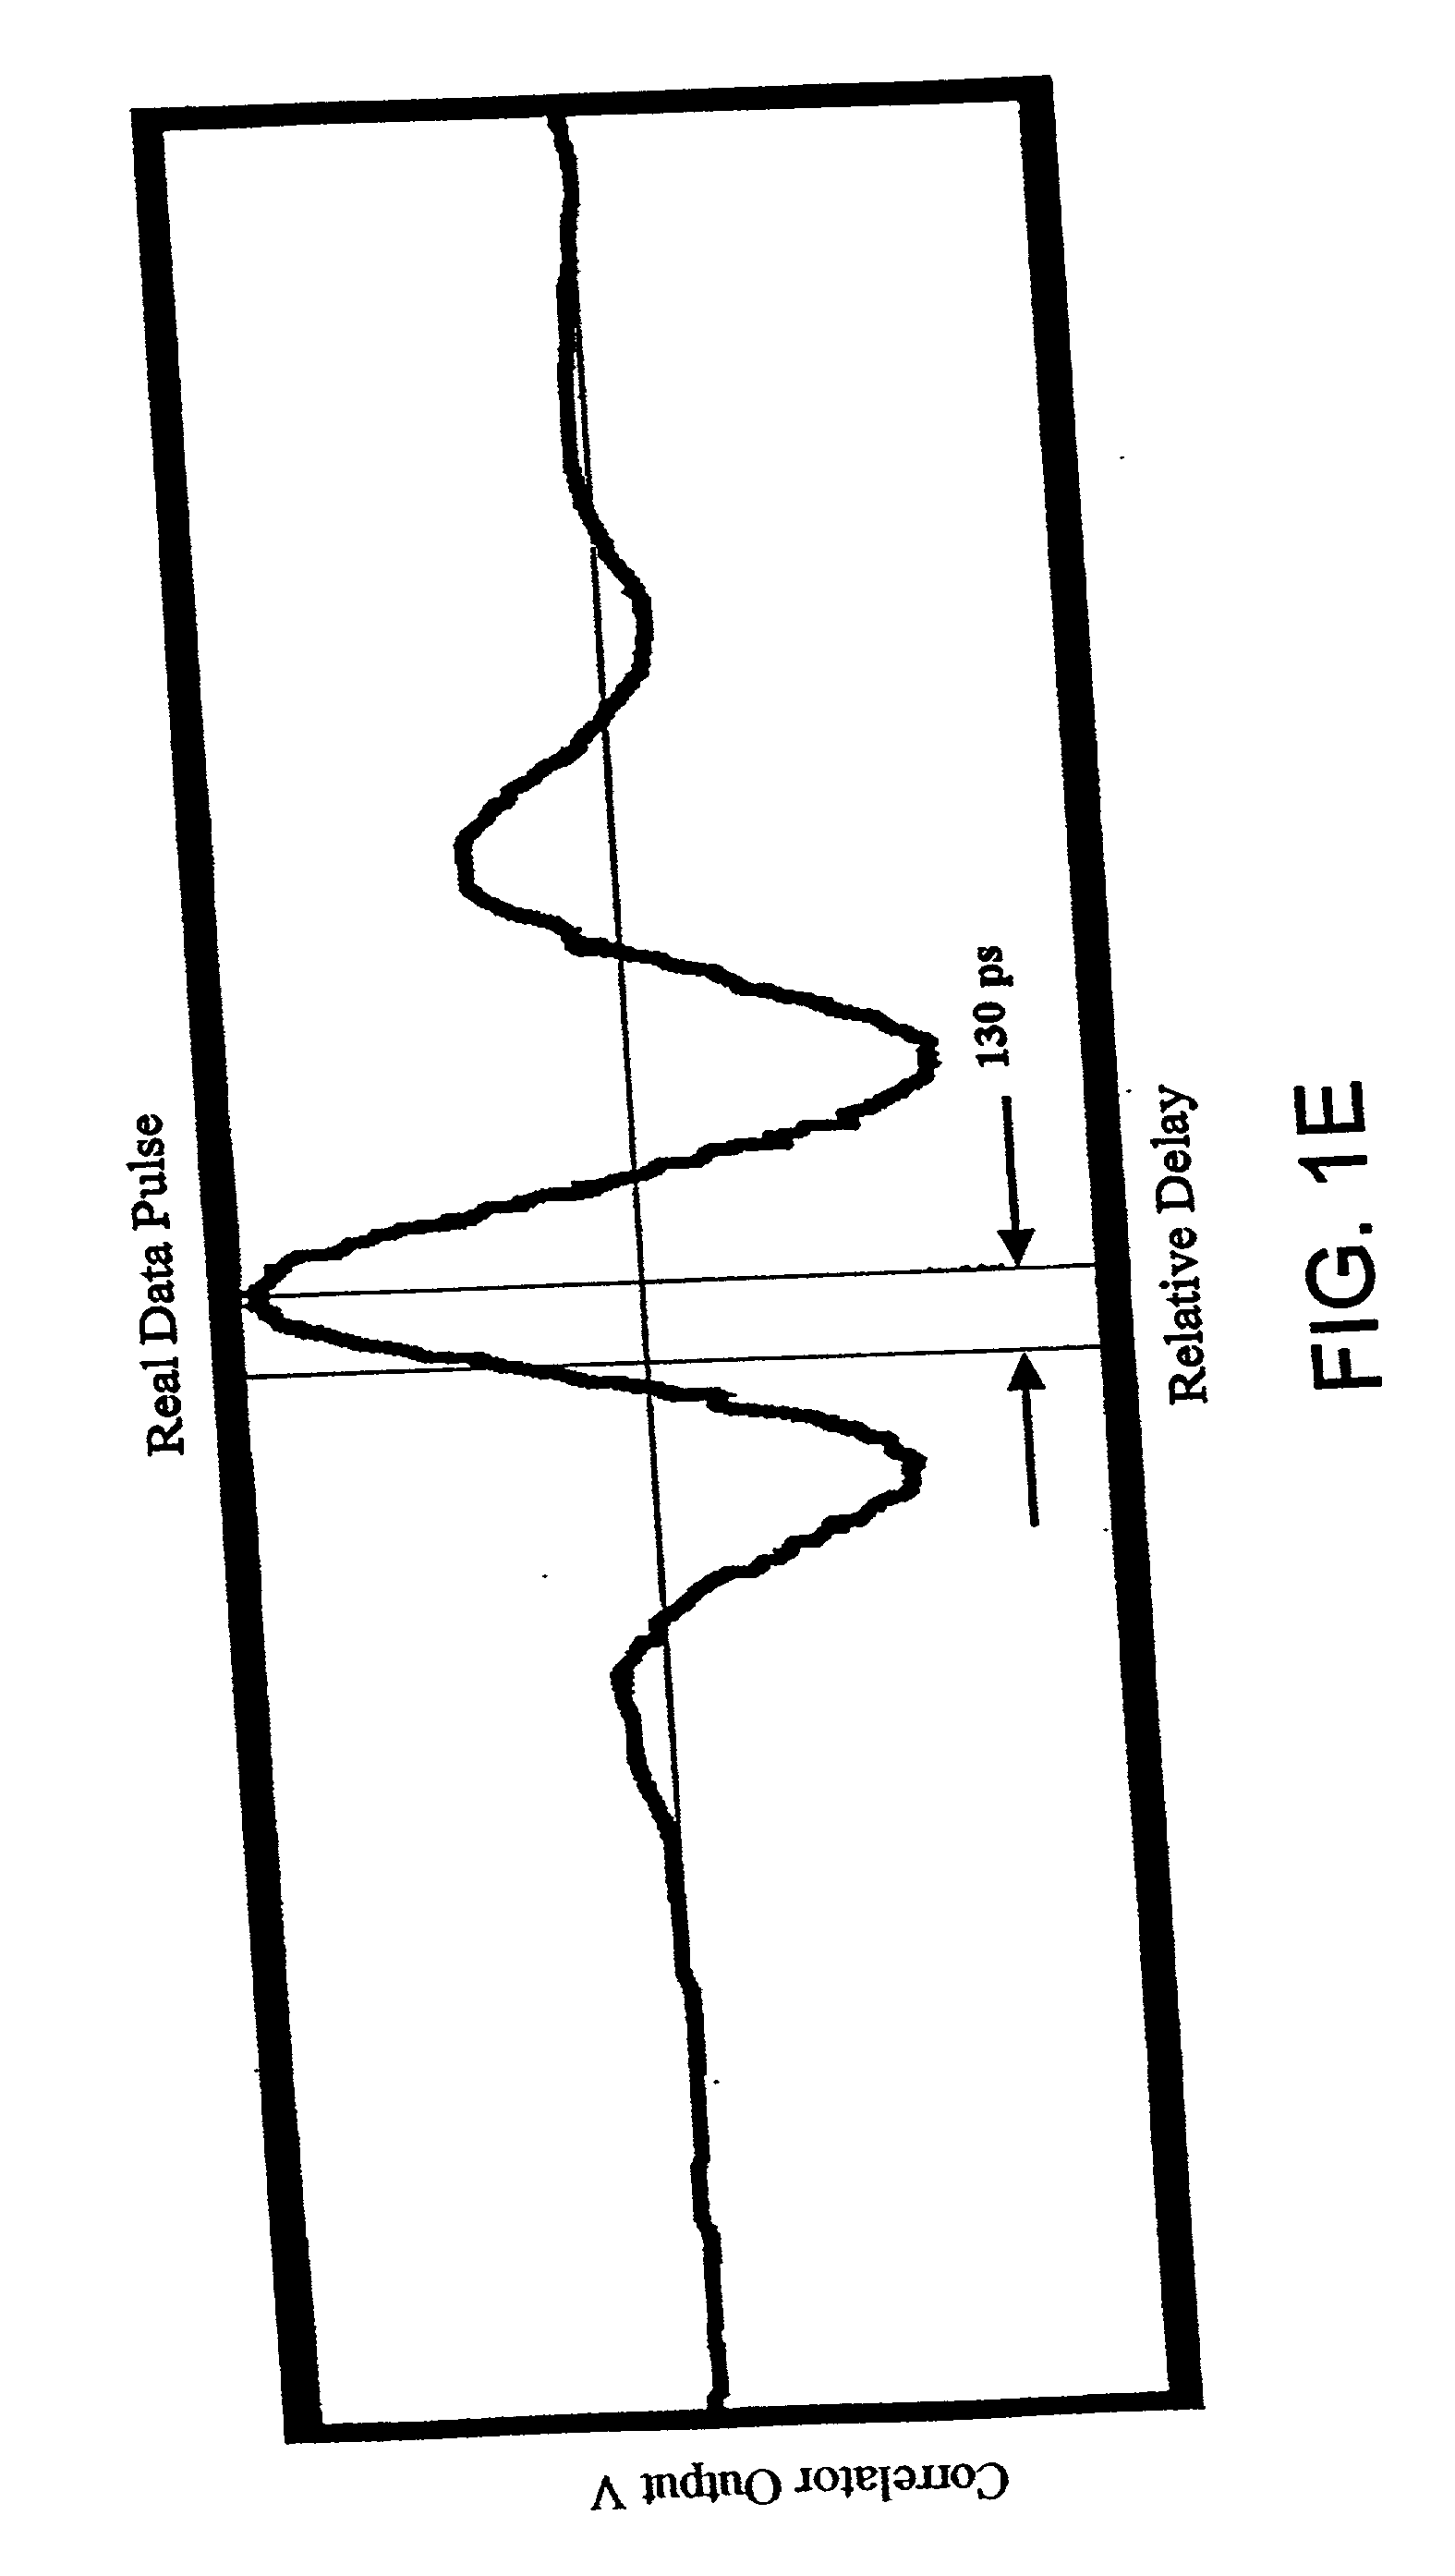 Wireless local area network using impulse radio technology to improve communications between mobile nodes and access points